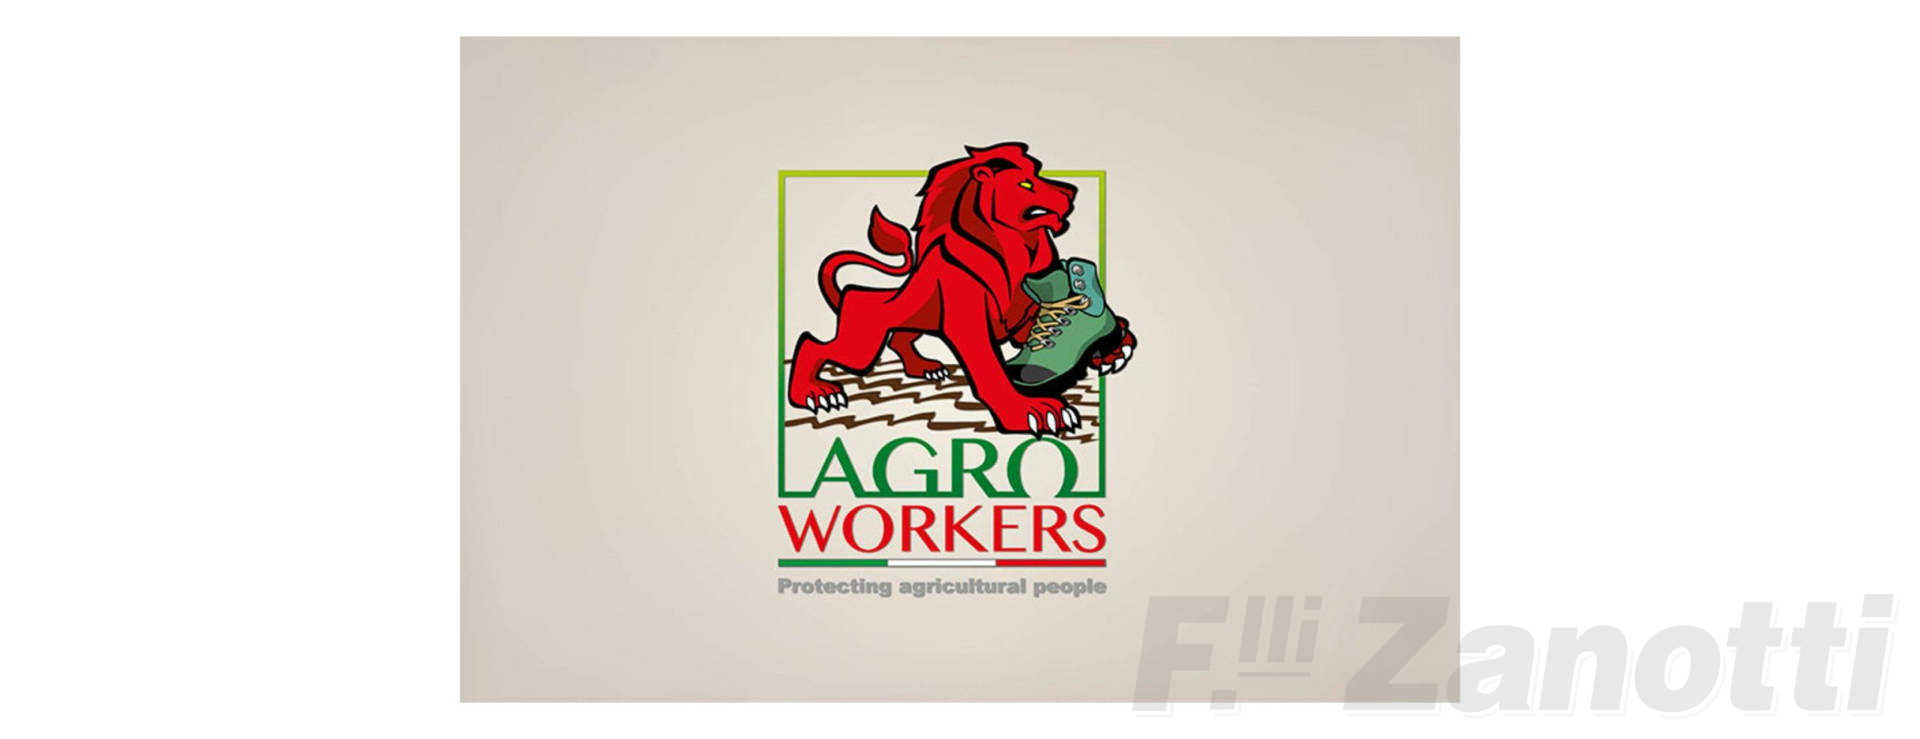 agro-workers-scaled.jpg